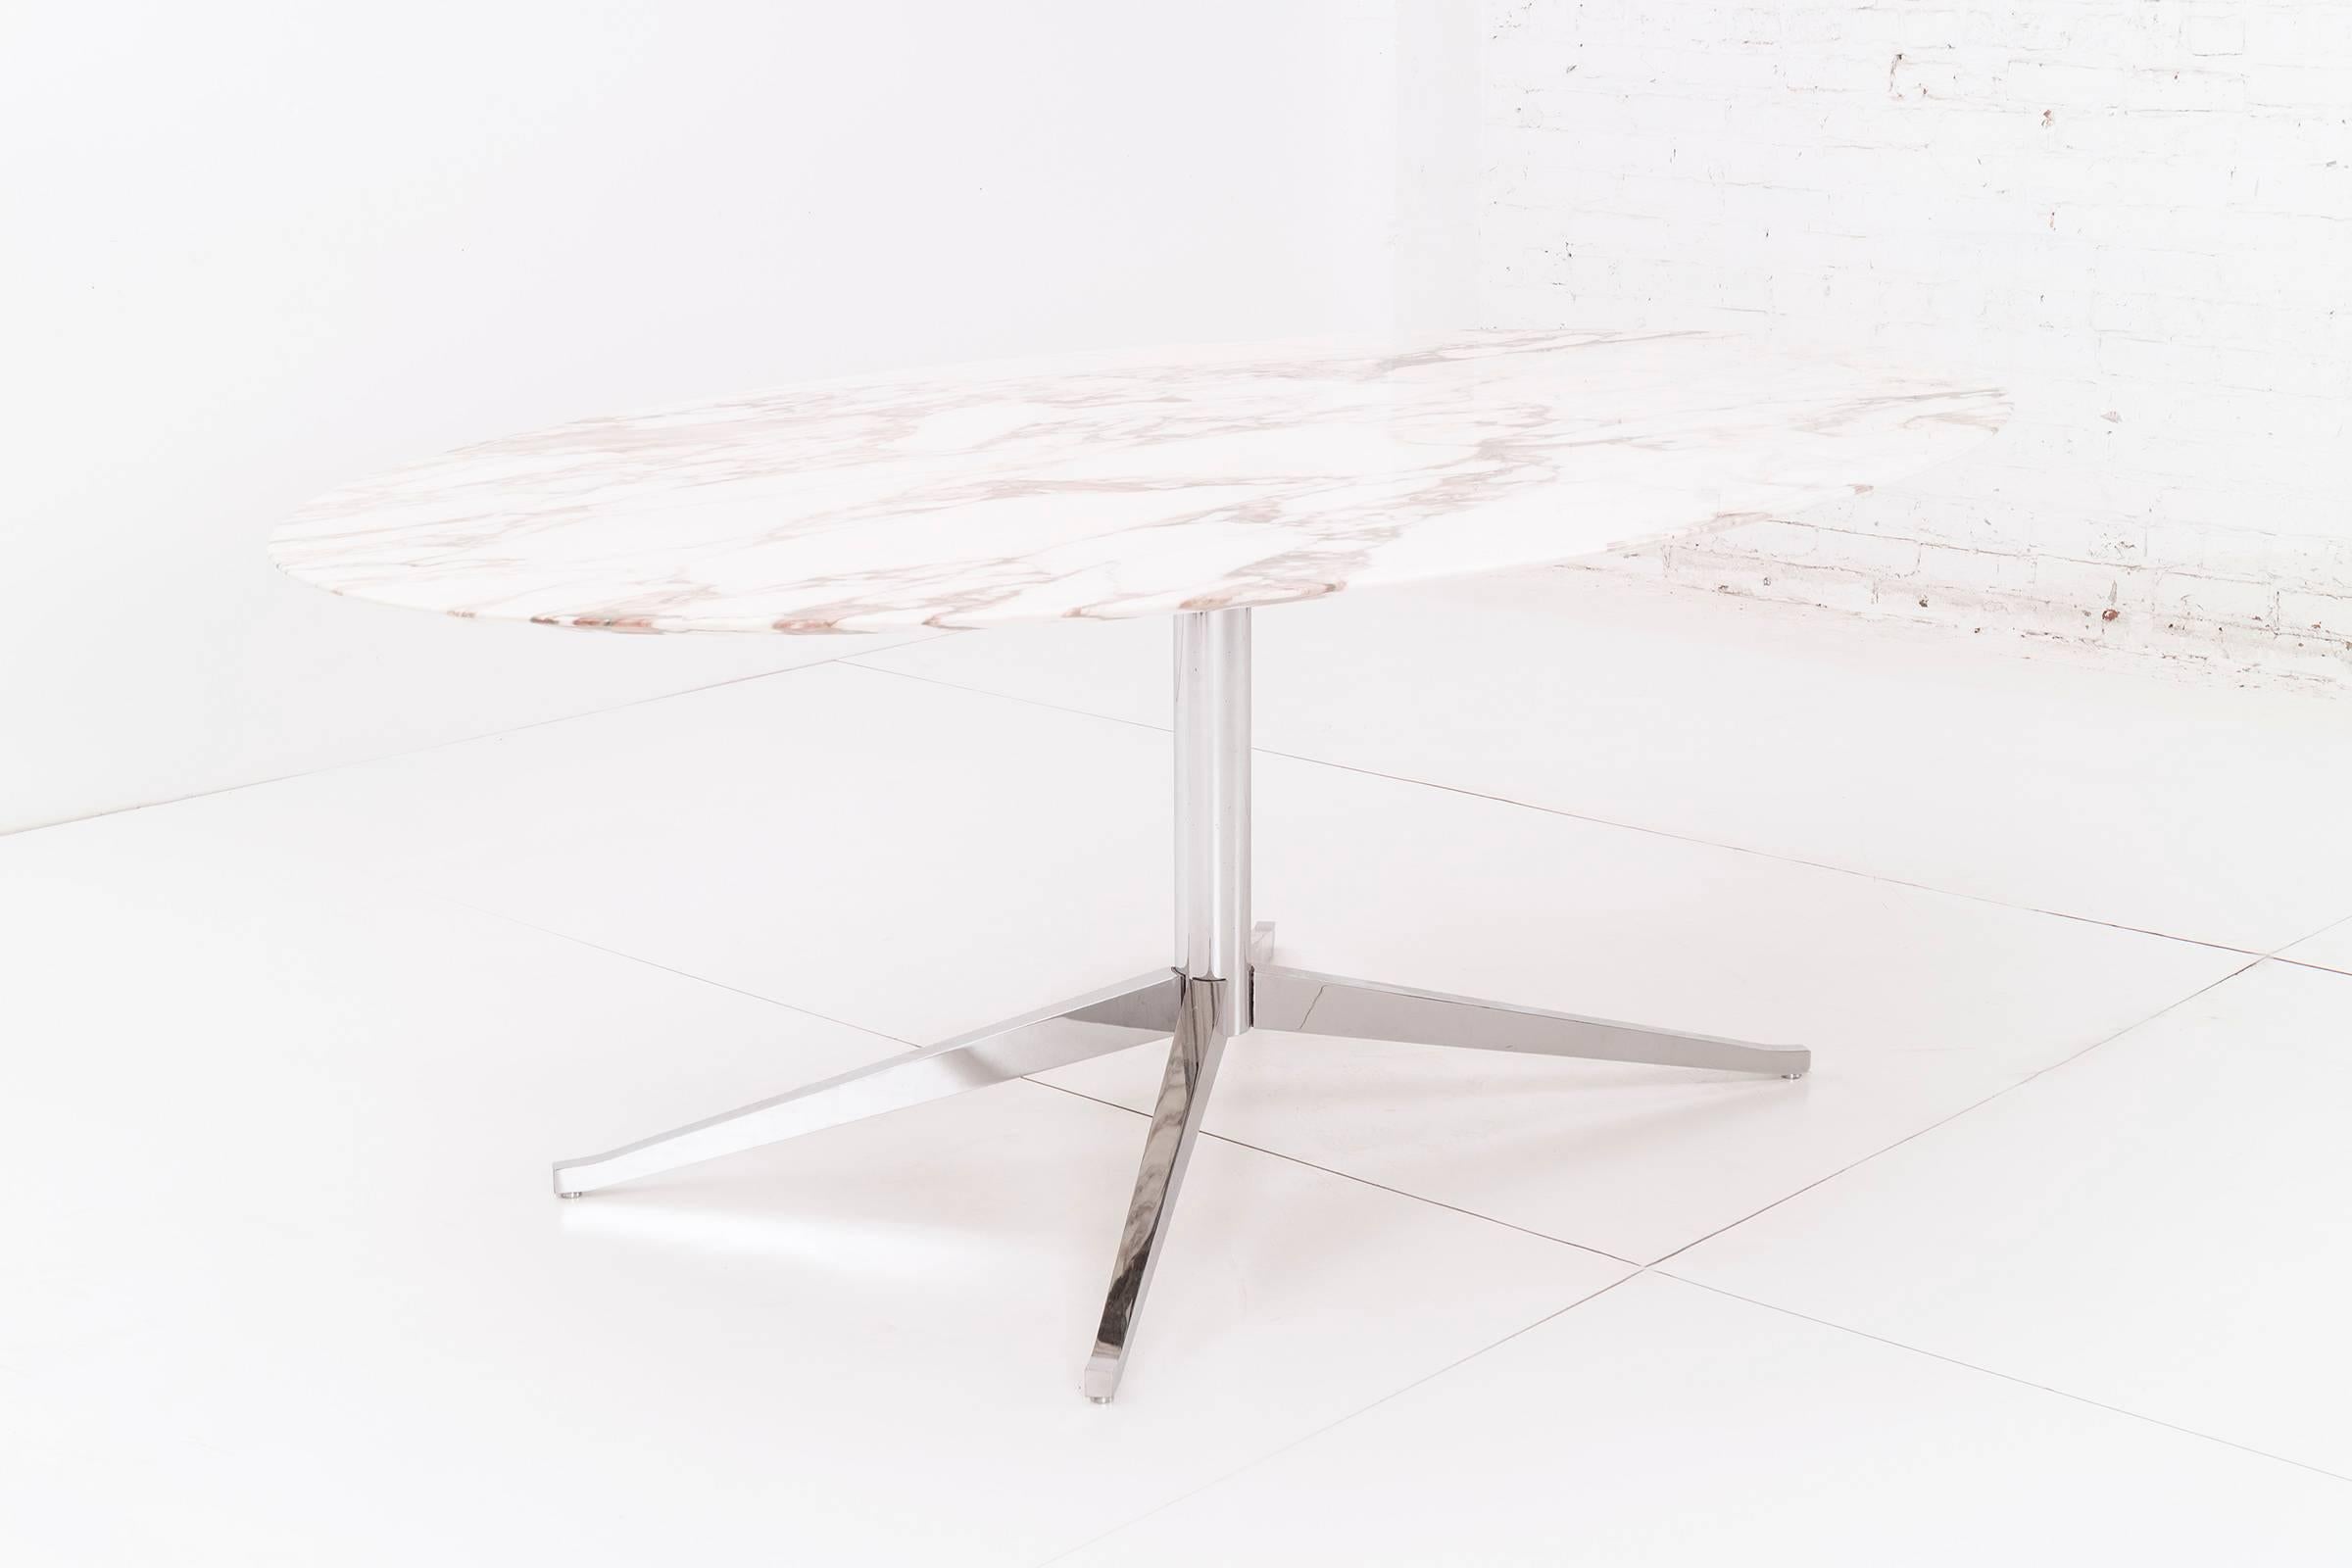 Chrome-plated steel pedestal based table with calacatta marble top. This versatile piece can be used as a dining table or desk.